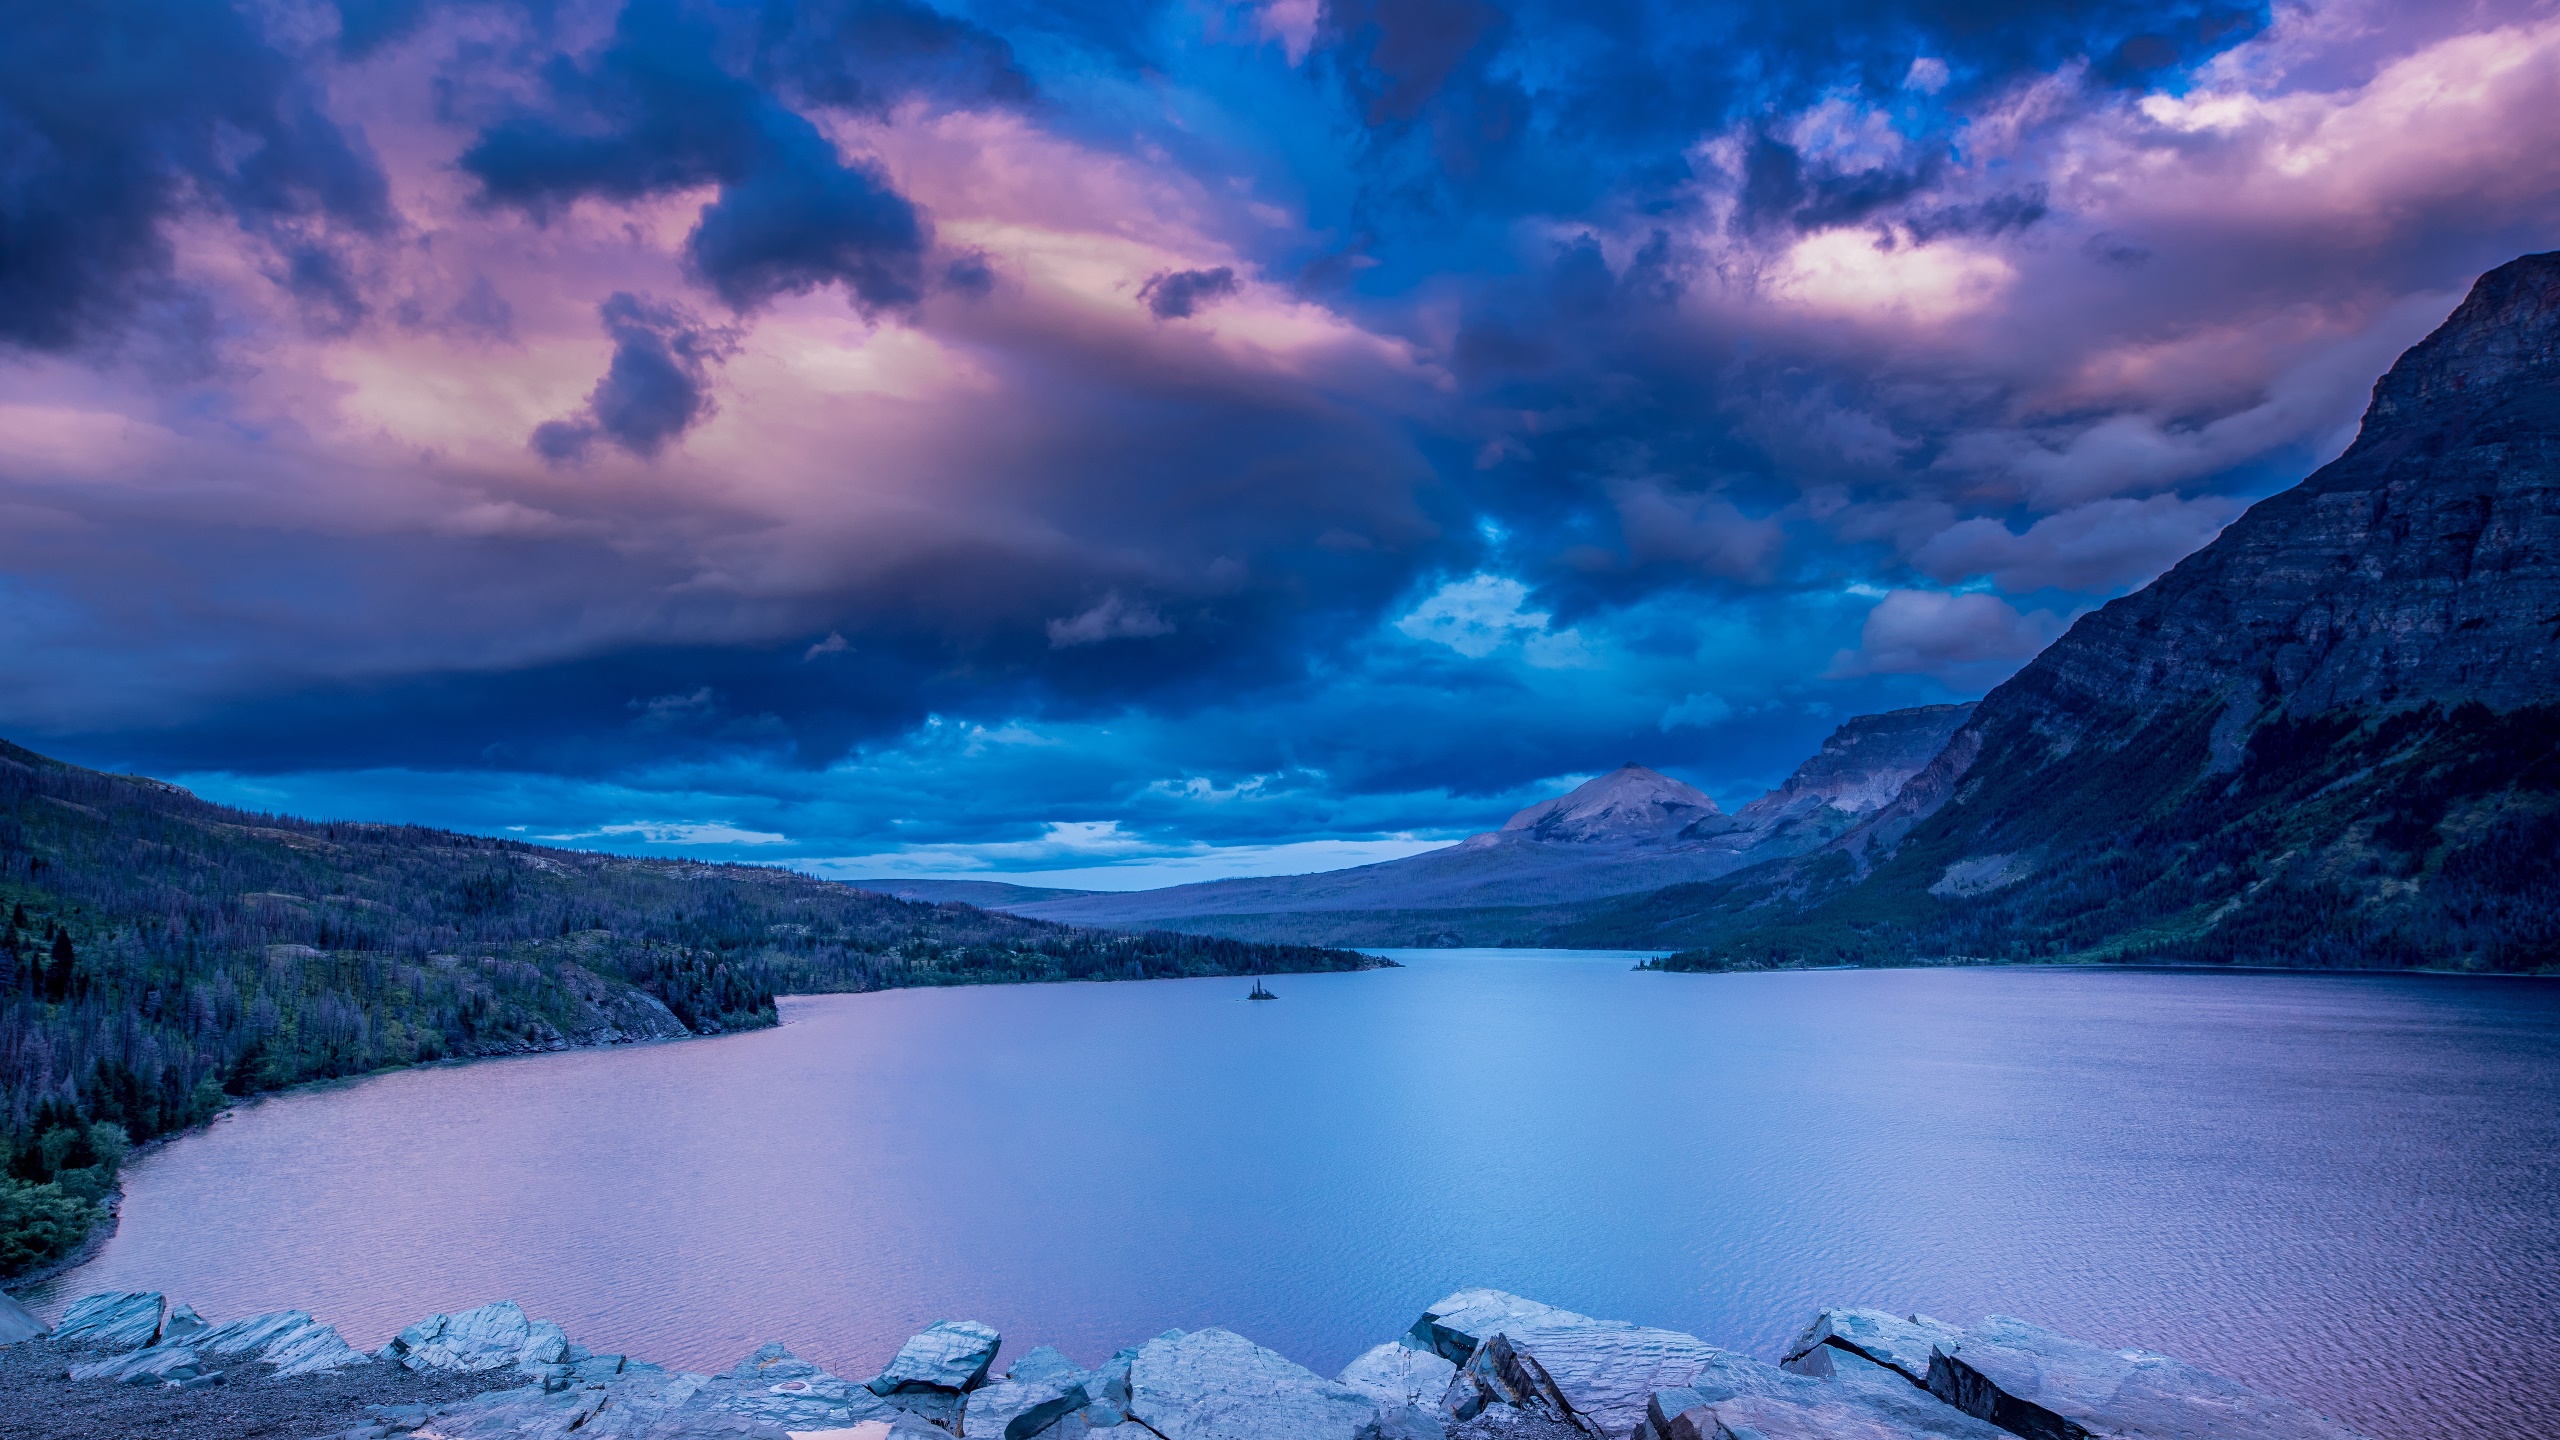 General 2560x1440 Rocky Mountains sky colorful nature lake water landscape Glacier National Park purple rugged terrain